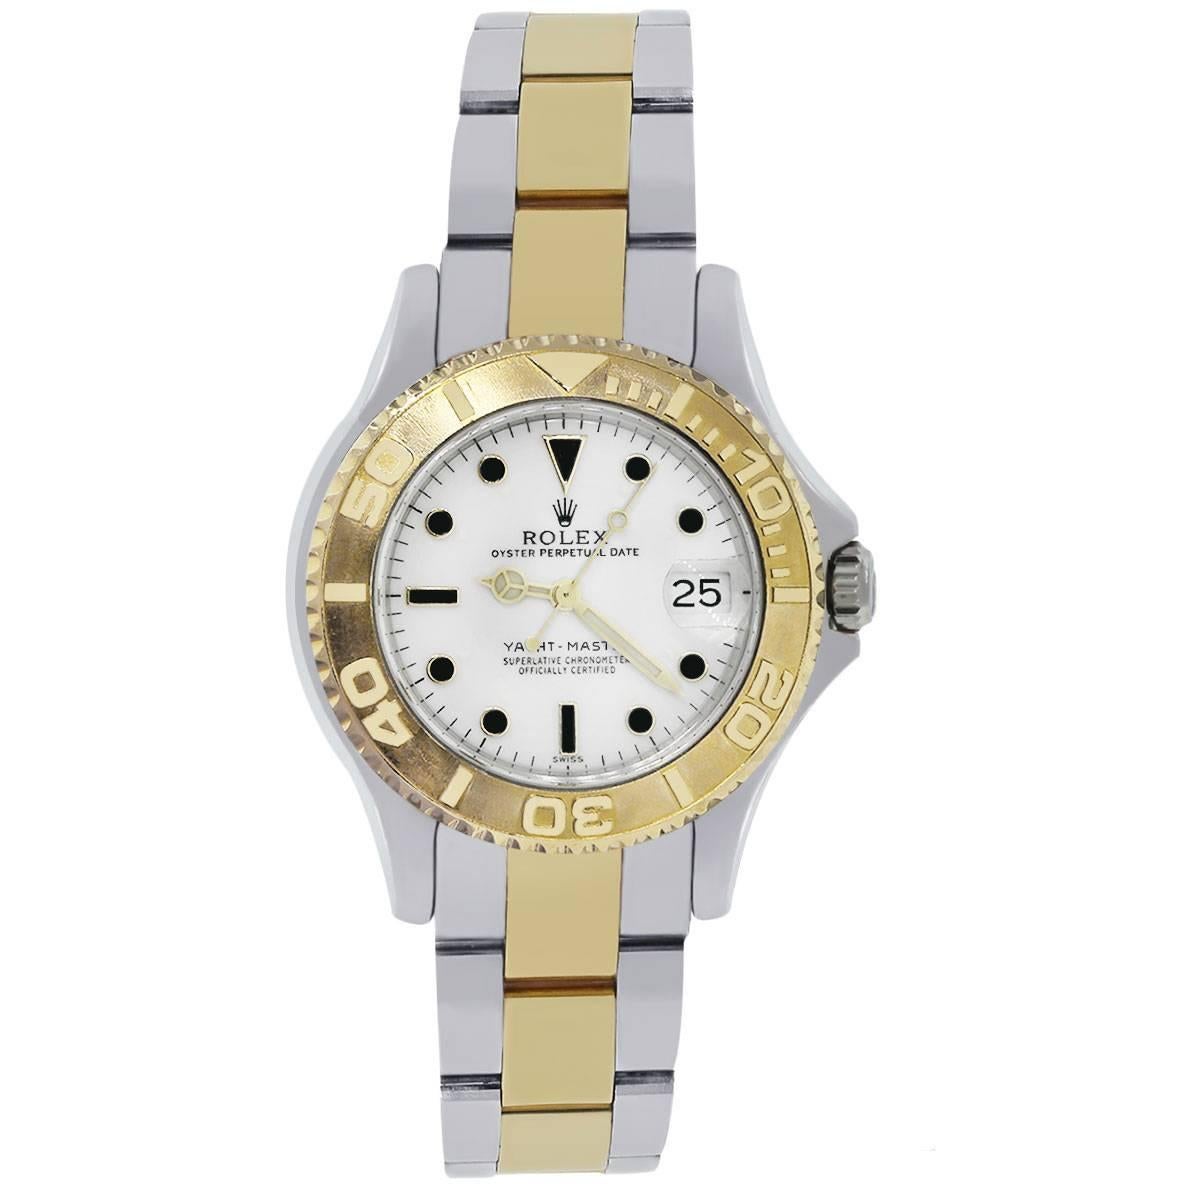 Brand: Rolex
MPN: 68623 
Model: Midsize Yacht Master
Case Material: 18k yellow gold and stainless steel
Case Diameter: 35mm
Crystal: Scratch resistant sapphire
Bezel: 18k yellow gold bi-directional rotating bezel
Dial: Original Rolex white dial with